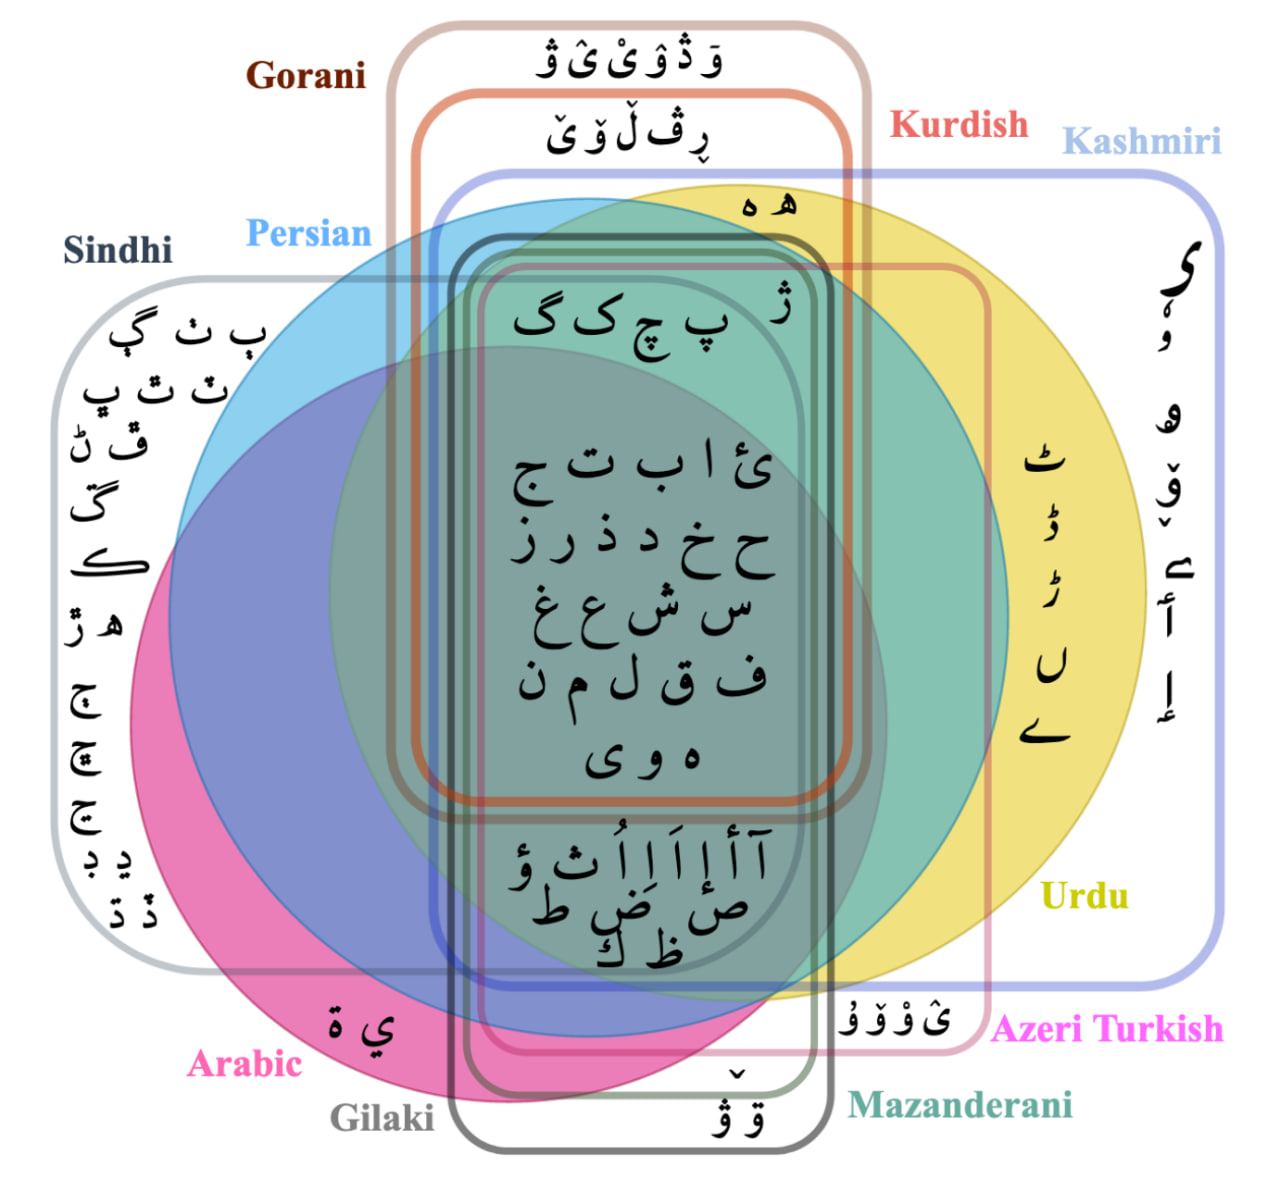 Perso-Arabic scripts that are targeted in this study.